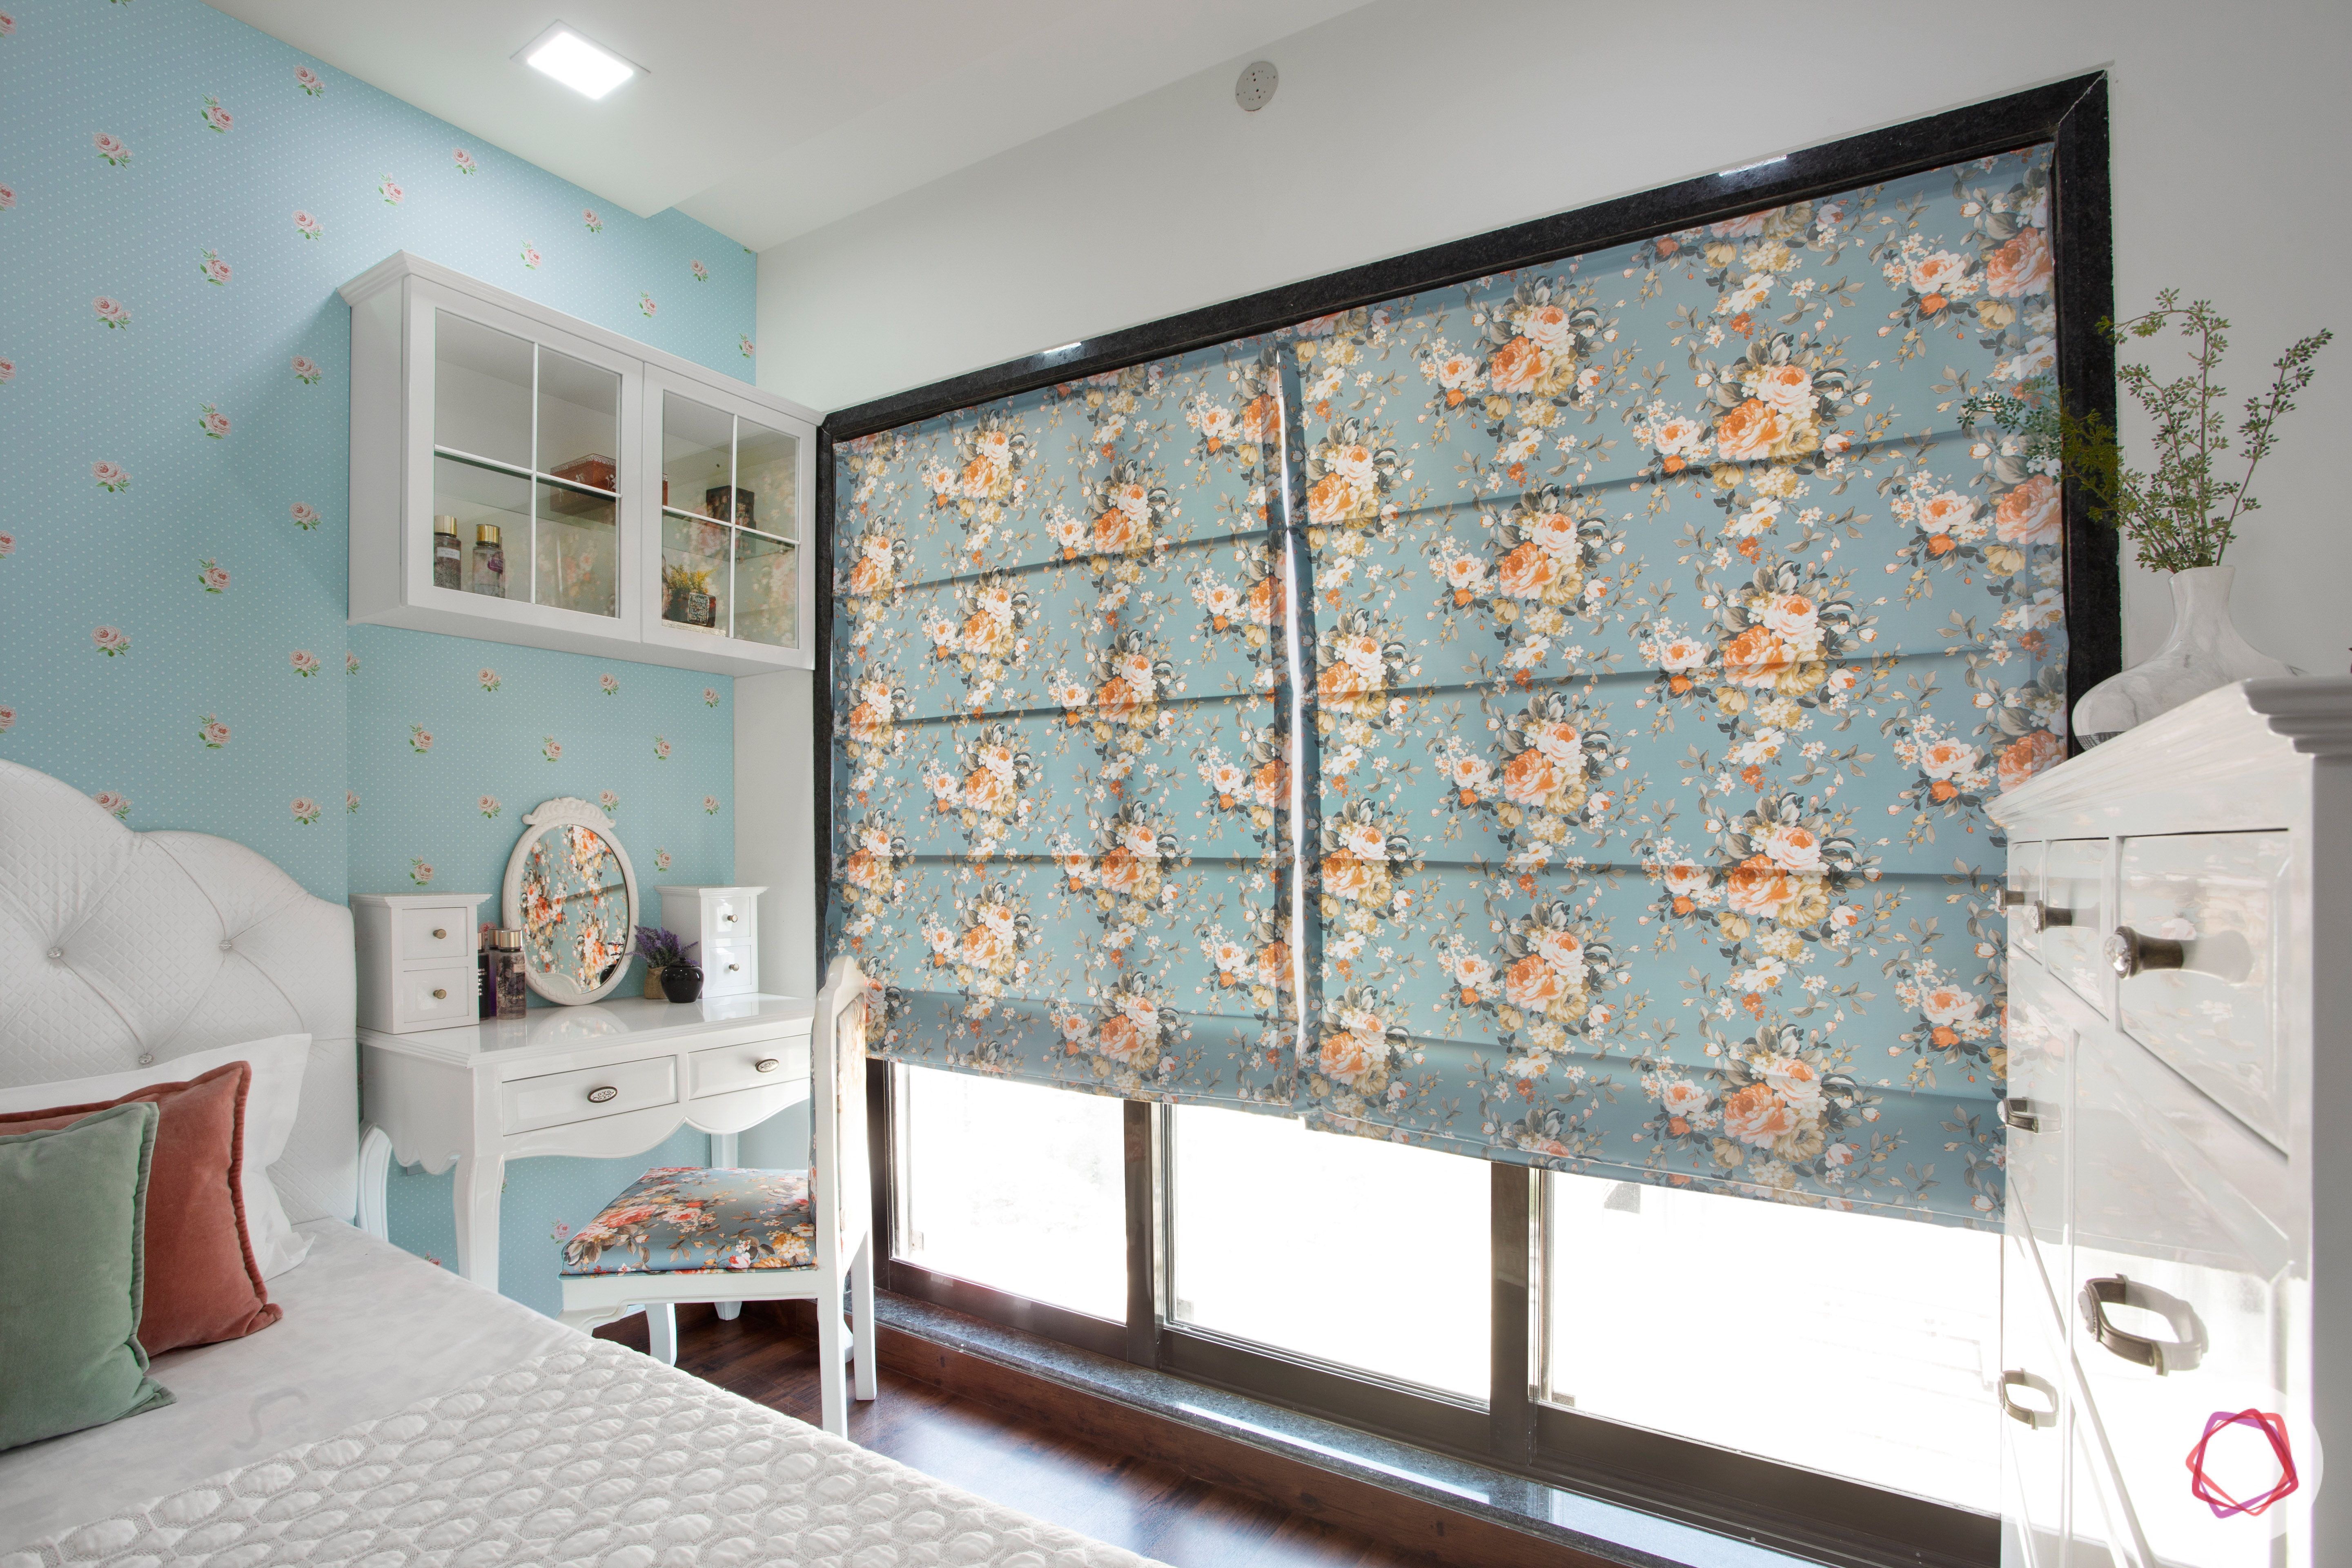 blinds-floral-bedroom-blue-wall-white-headboard-study-table-chair